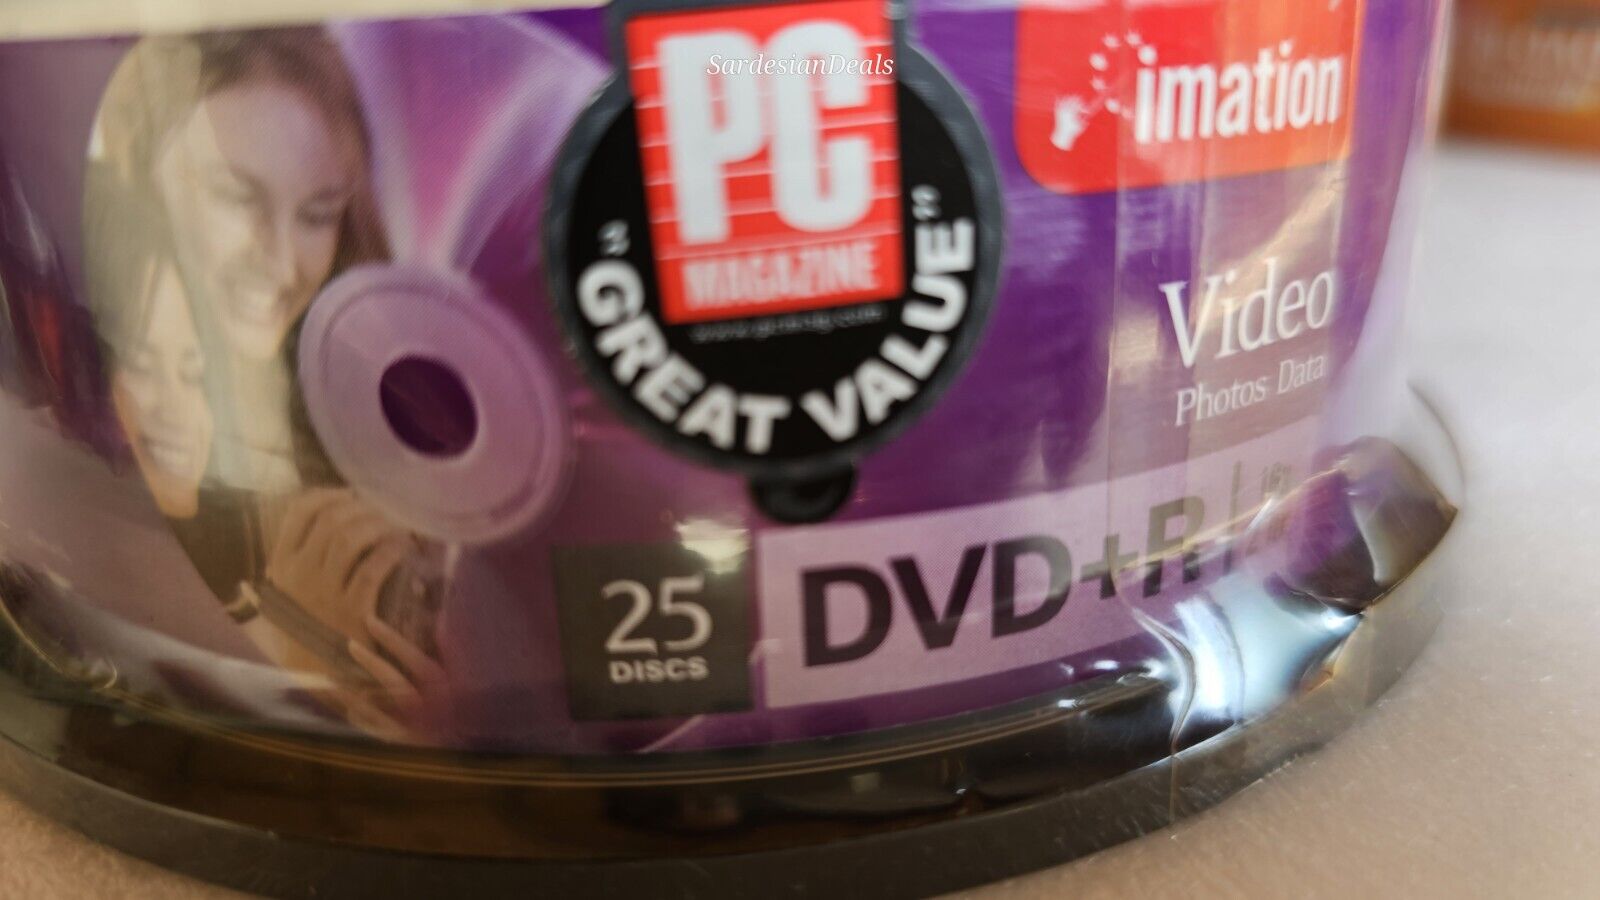 Imation DVD+R 4.7GB 8X 25 Disc Spindle  - Sealed 